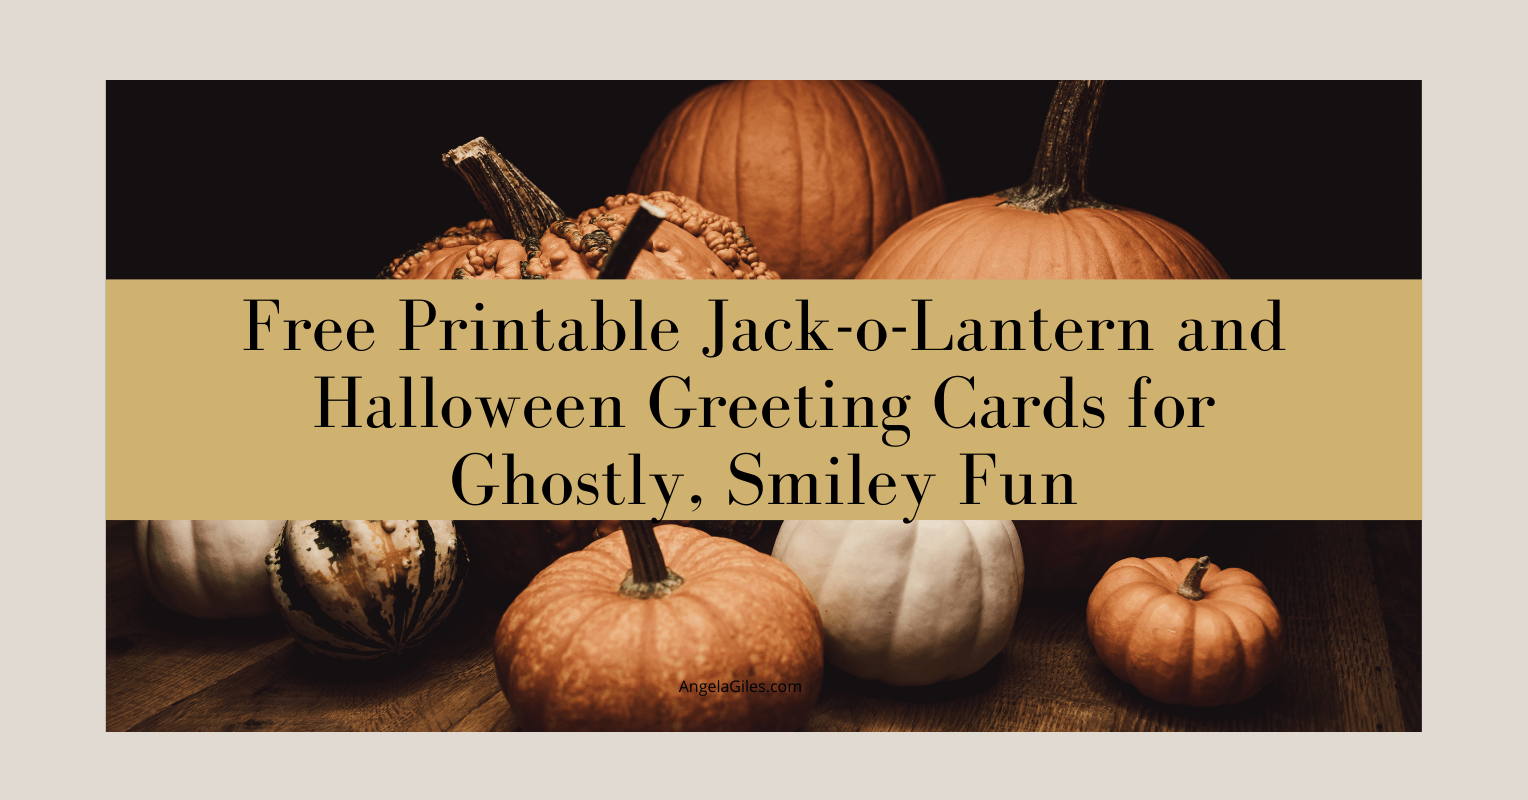 Free Printable Jack-o-Lantern and Halloween Greeting Cards for Ghostly, Smiley Fun